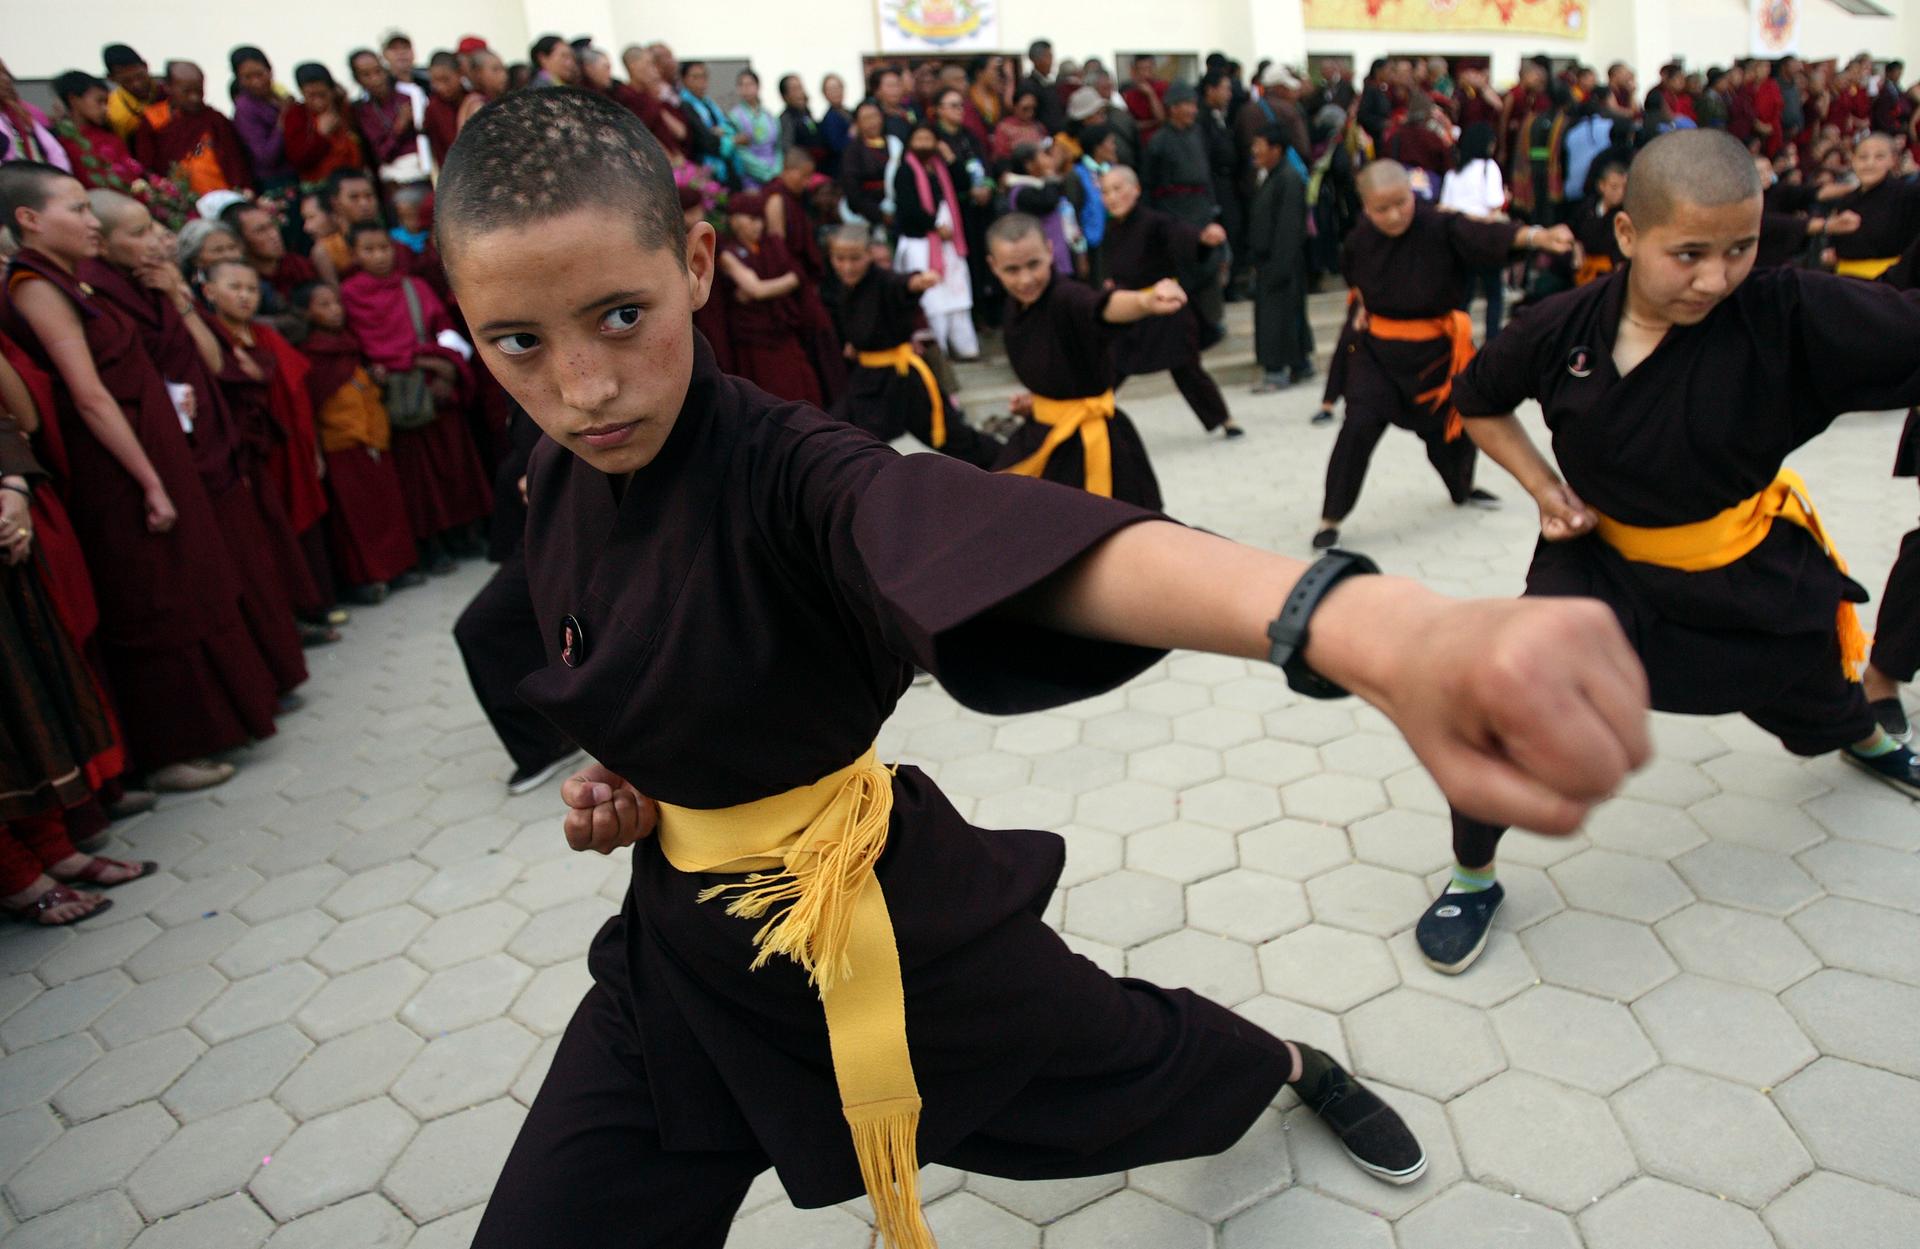 A Buddhist nun with a shaved head takes part in a Kung Fu display